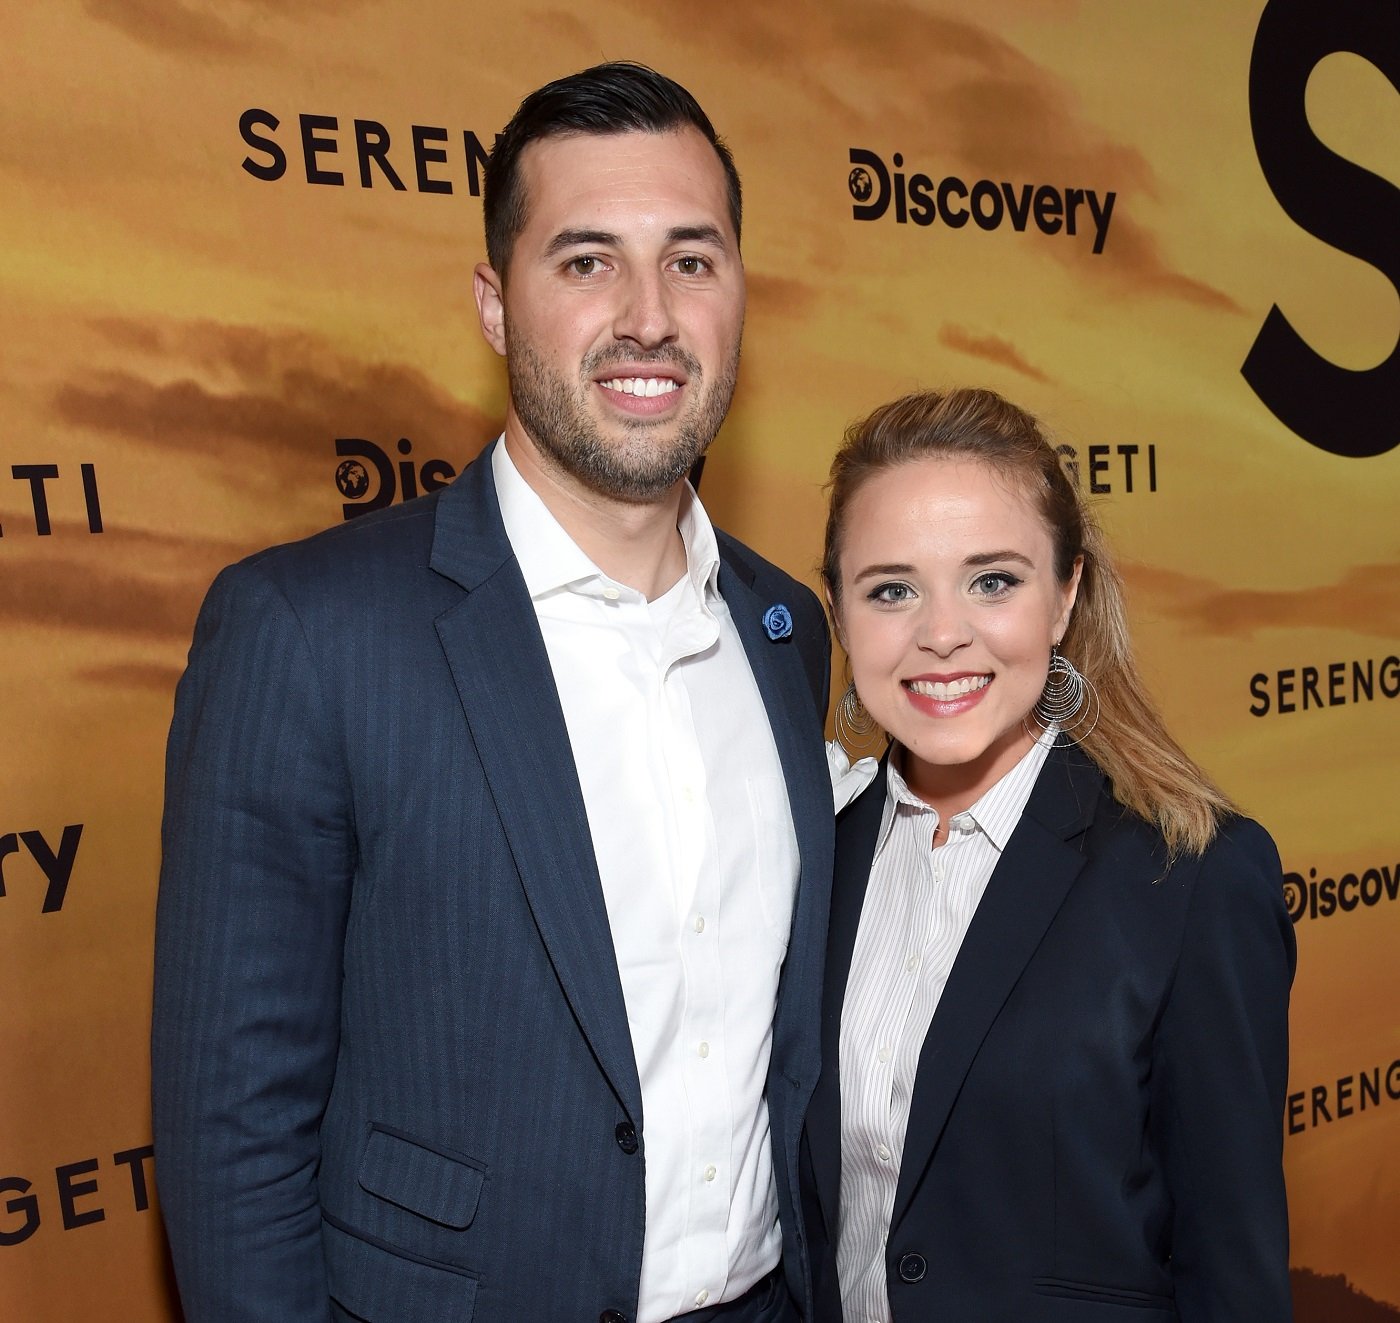 Jeremy Vuolo and Jinger Vuolo attend Discovery's 'Serengeti' premiere at Wallis Annenberg Center for the Performing Arts on July 23, 2019